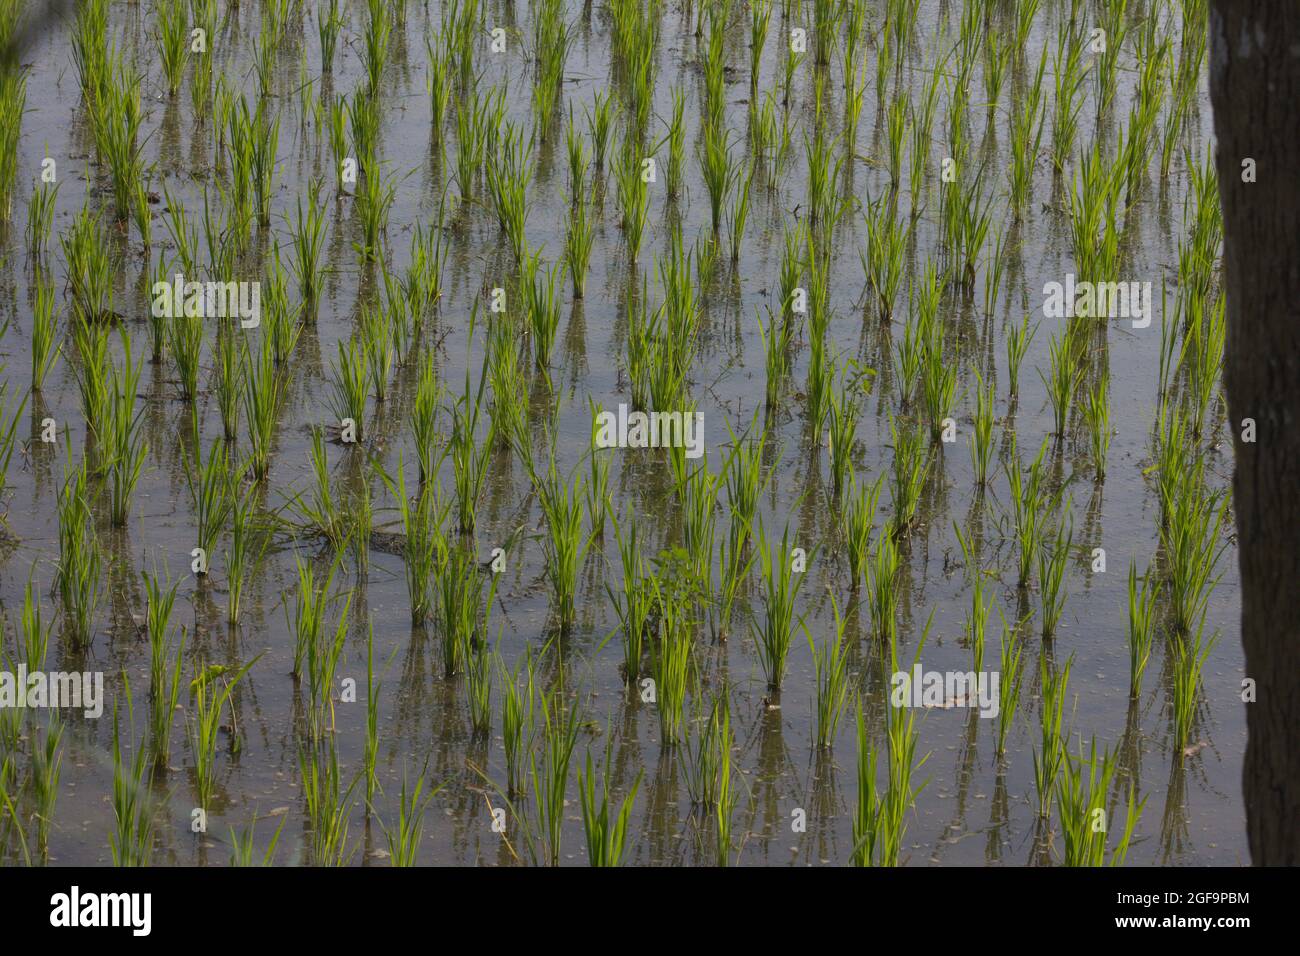 The Paddy Field Stock Photo